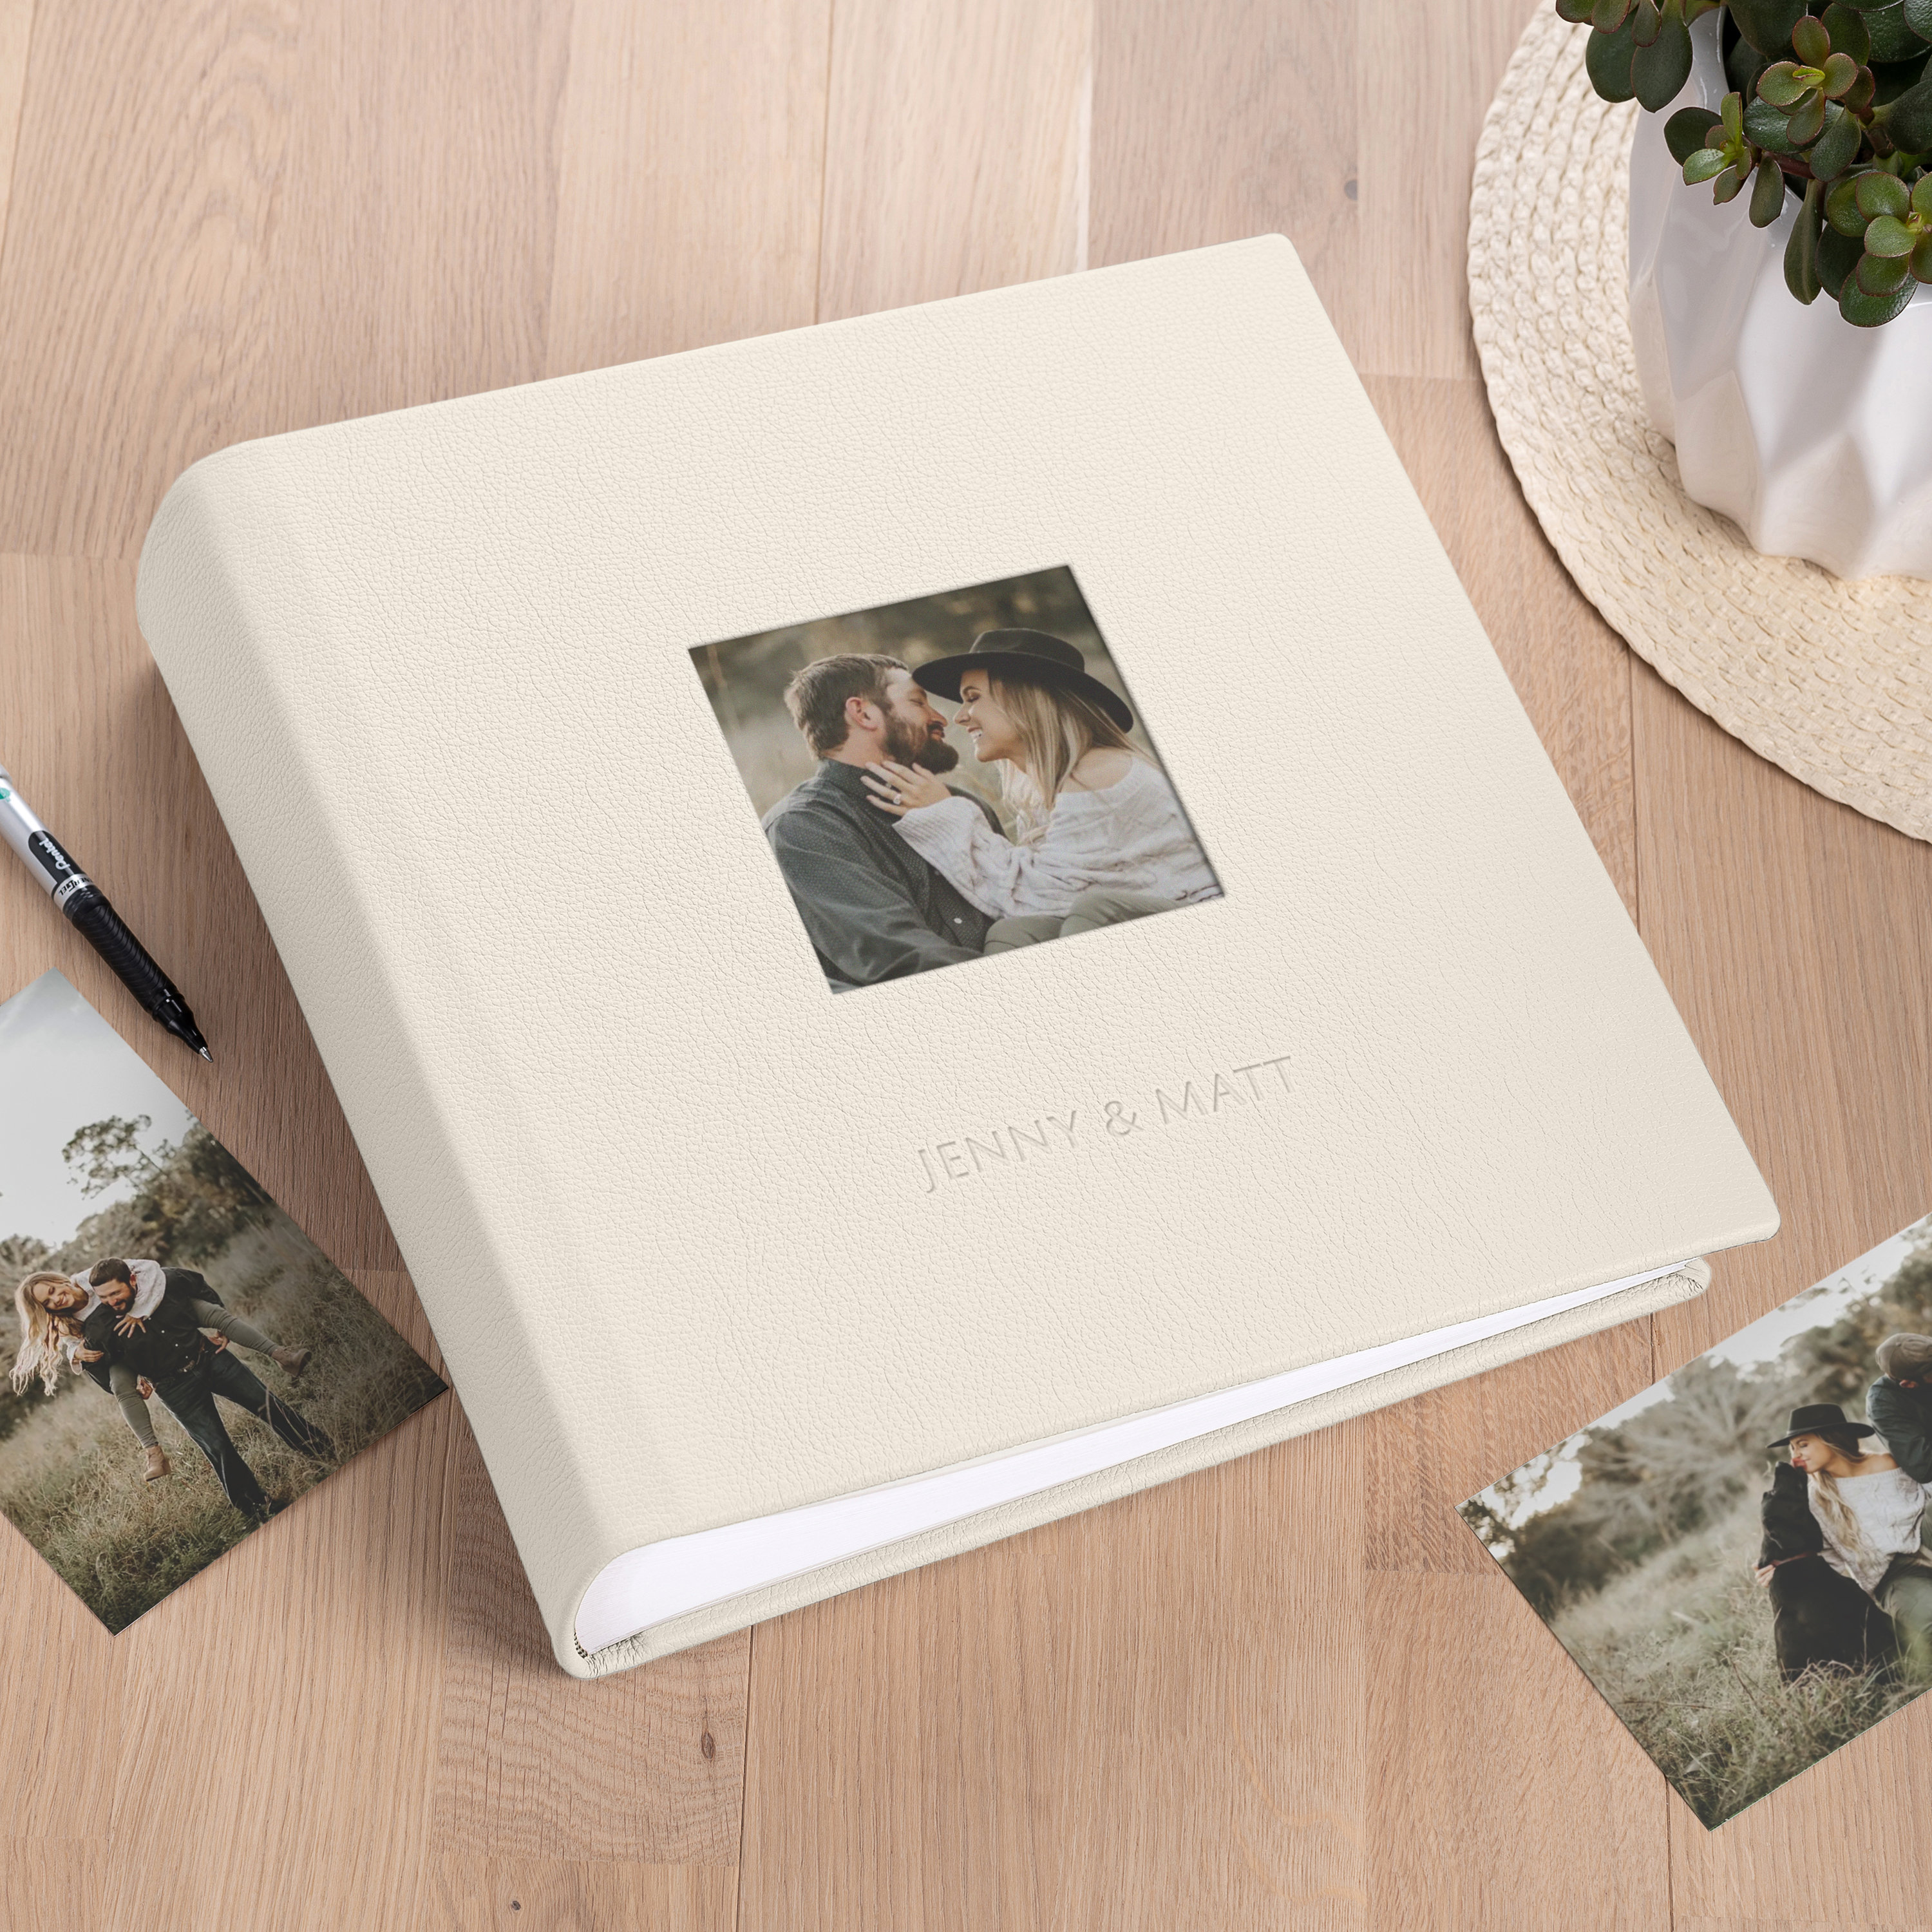 CELEBRATIONS Black Bonded-Leather Album for your 4x6 or 5x7 prints